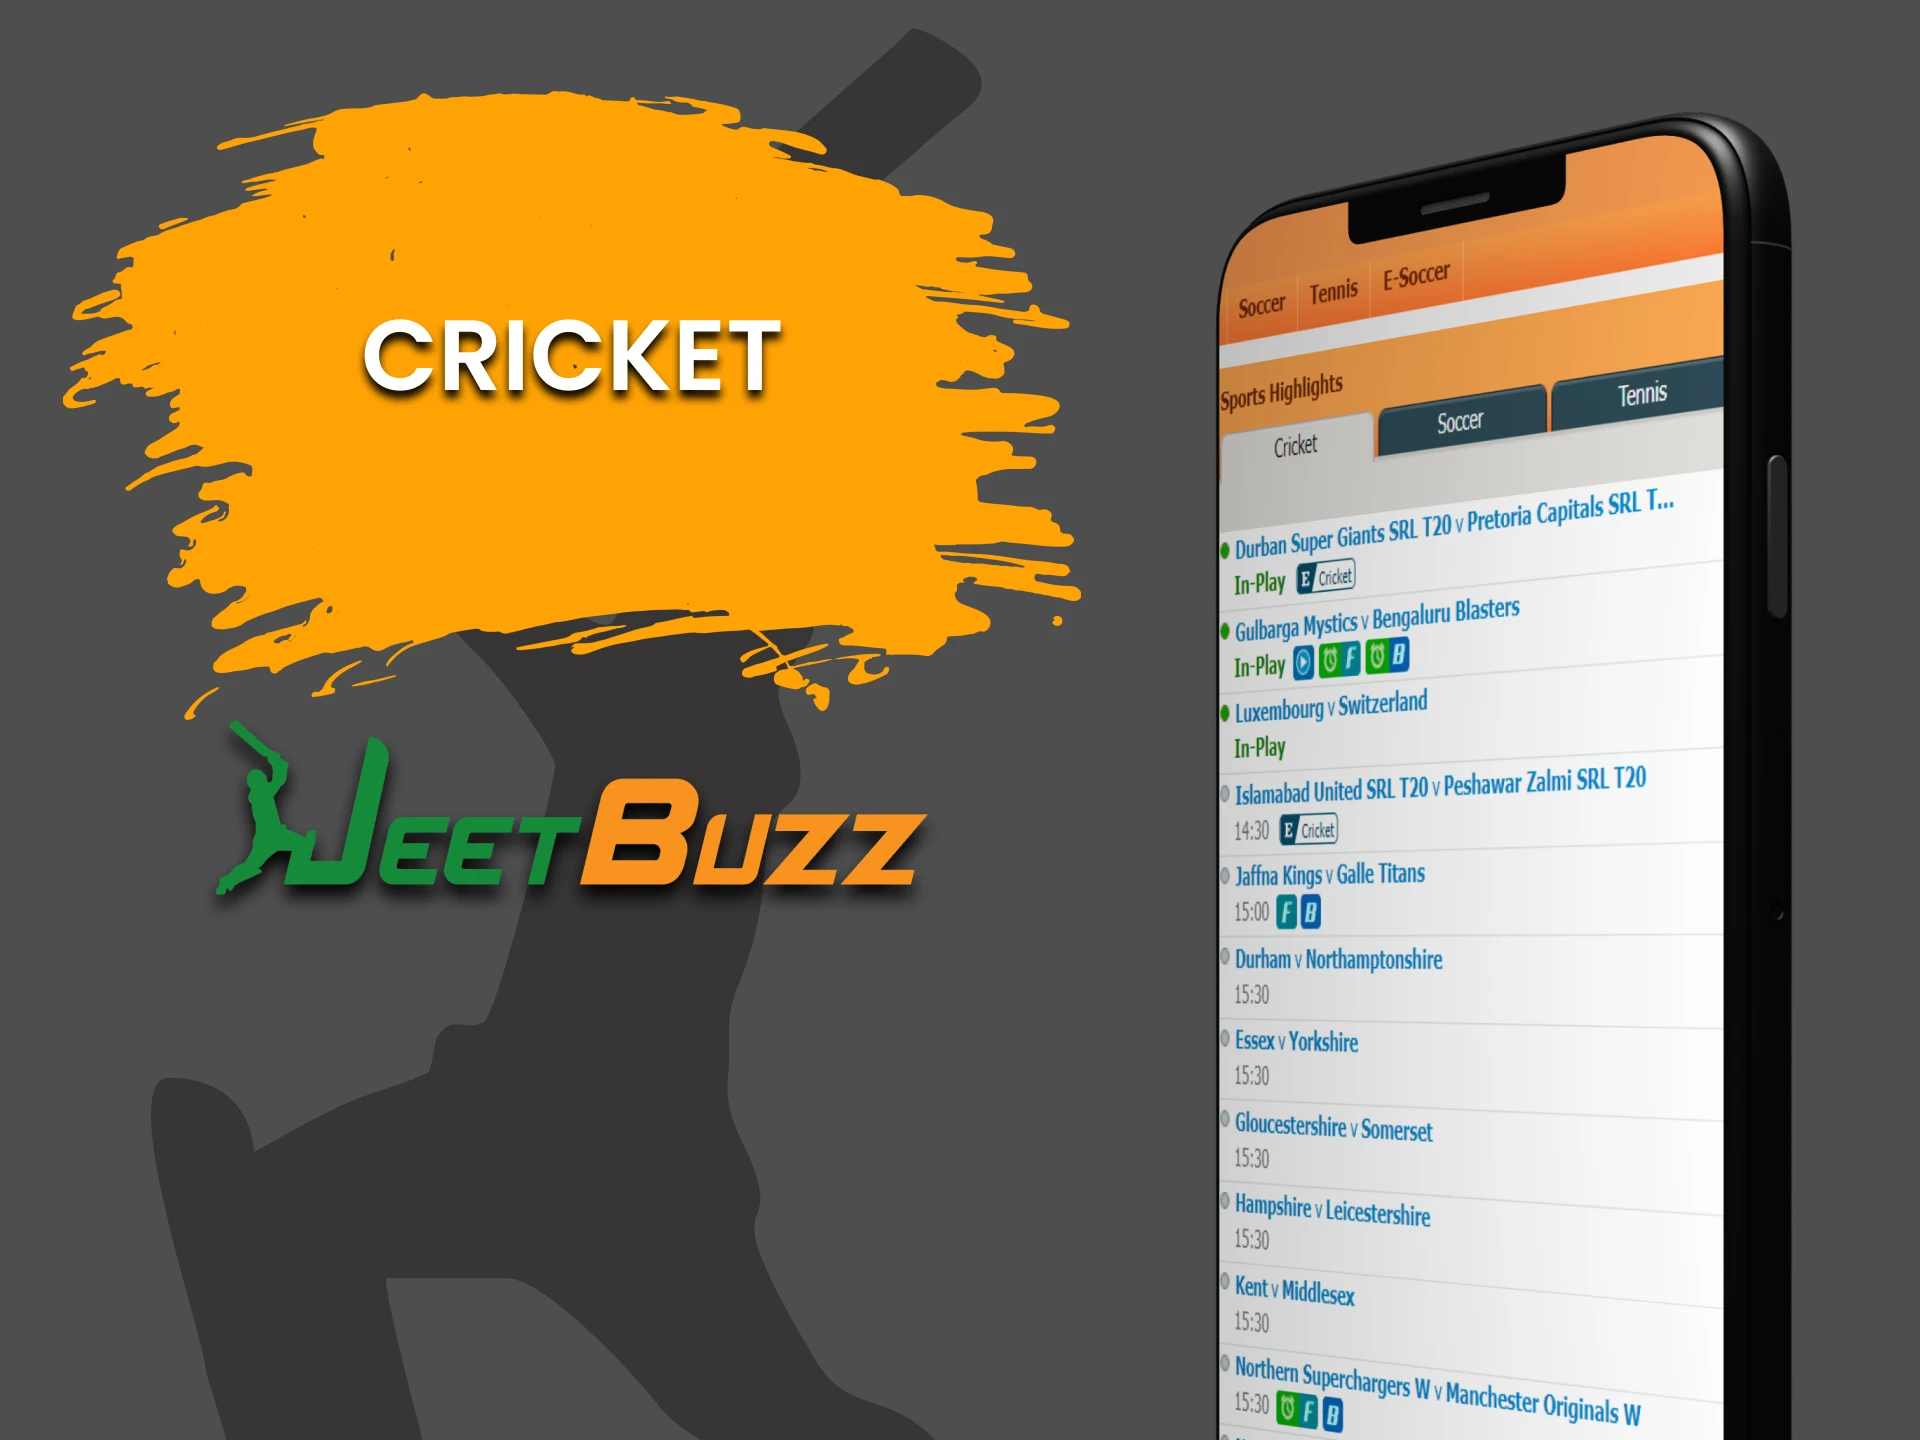 For sports betting on the JeetBuzz app, select Cricket.